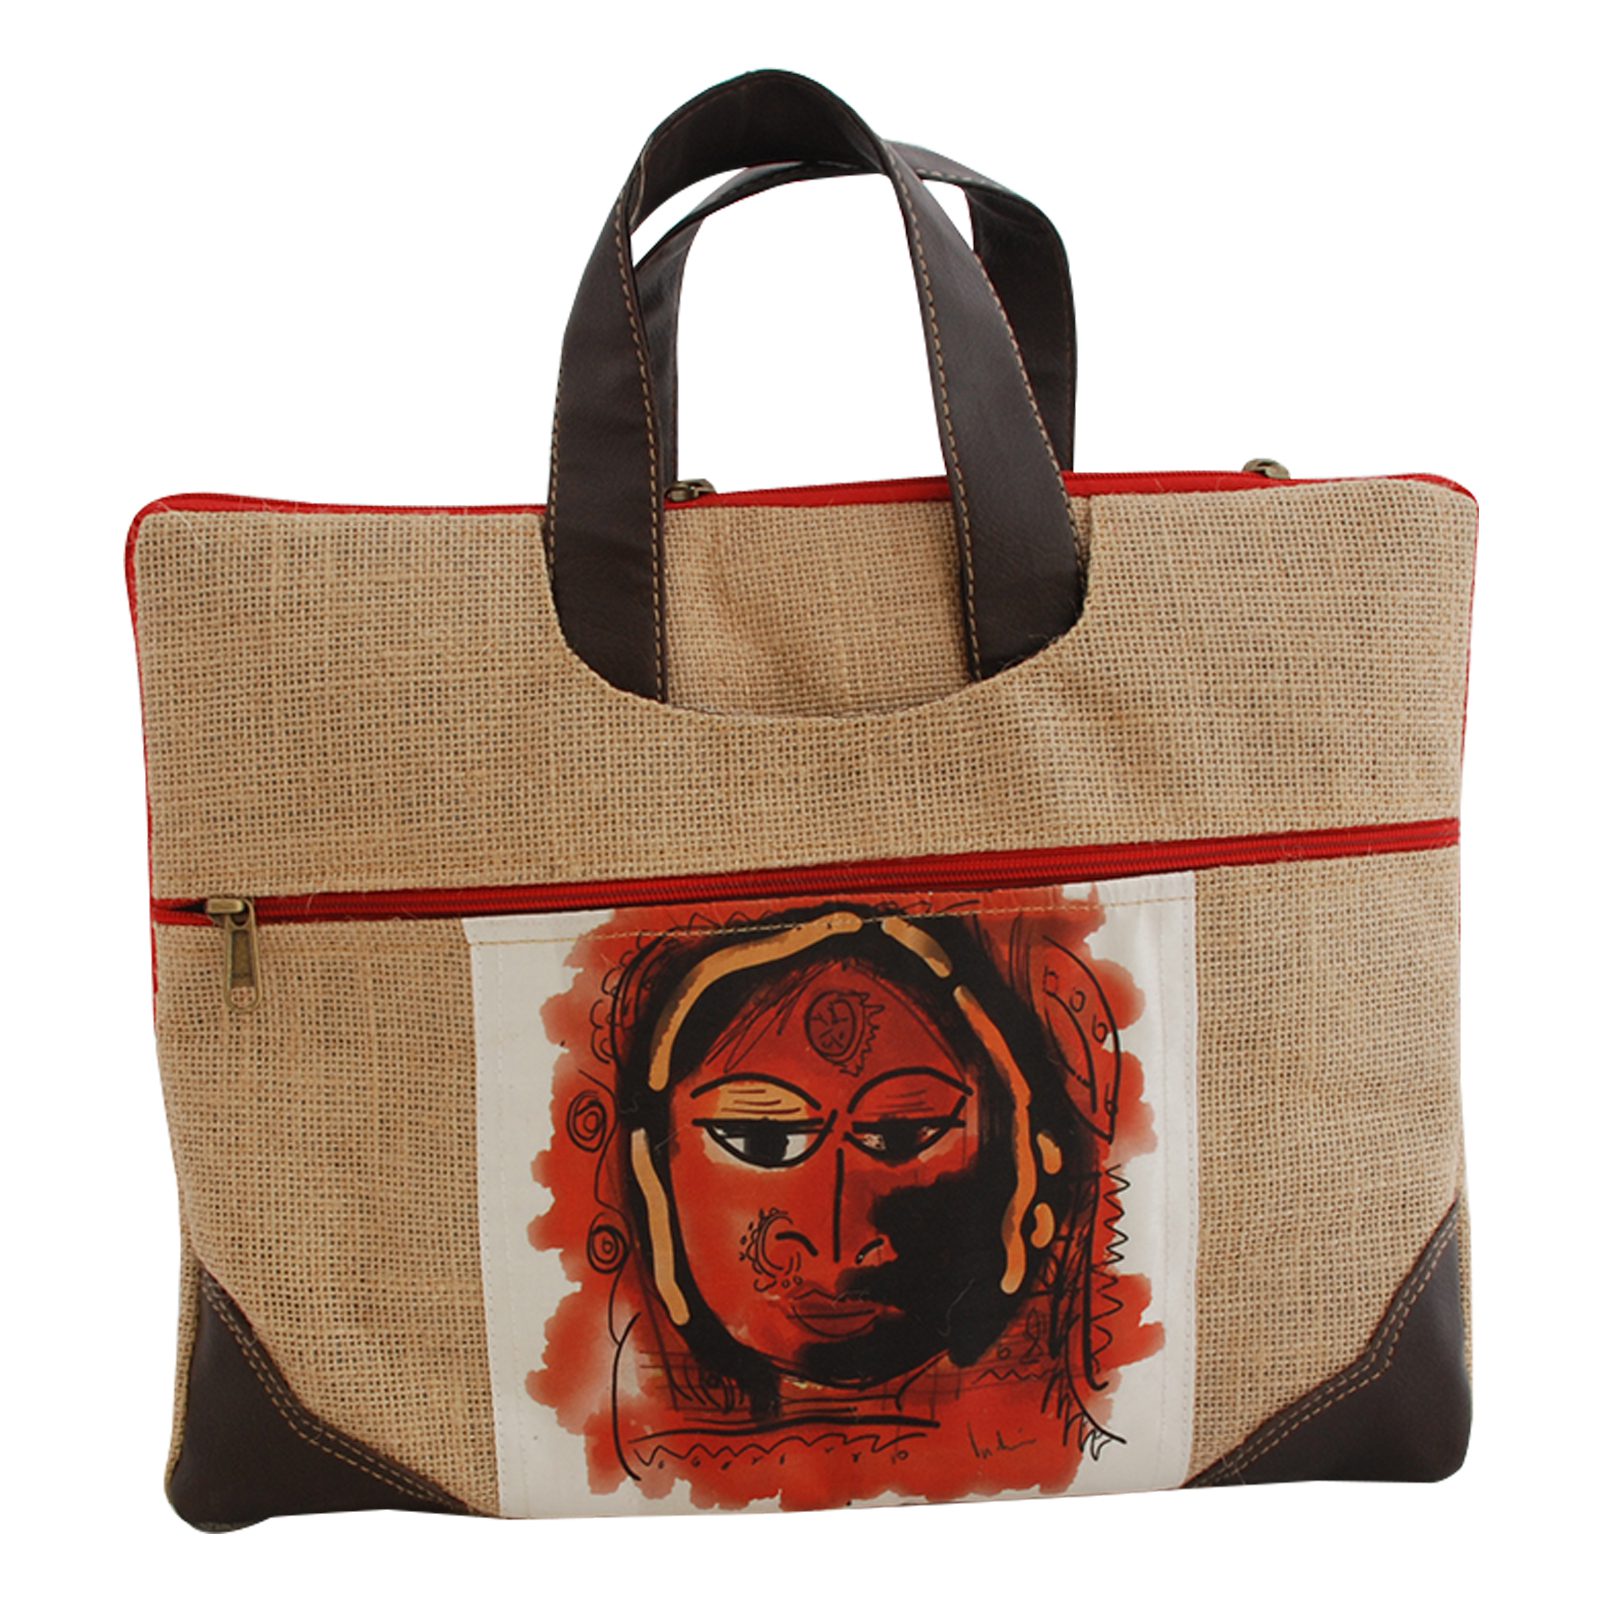 Handmade Jute Laptop Bags Online at Indha Craft - Curated online shop for handcrafted products ...